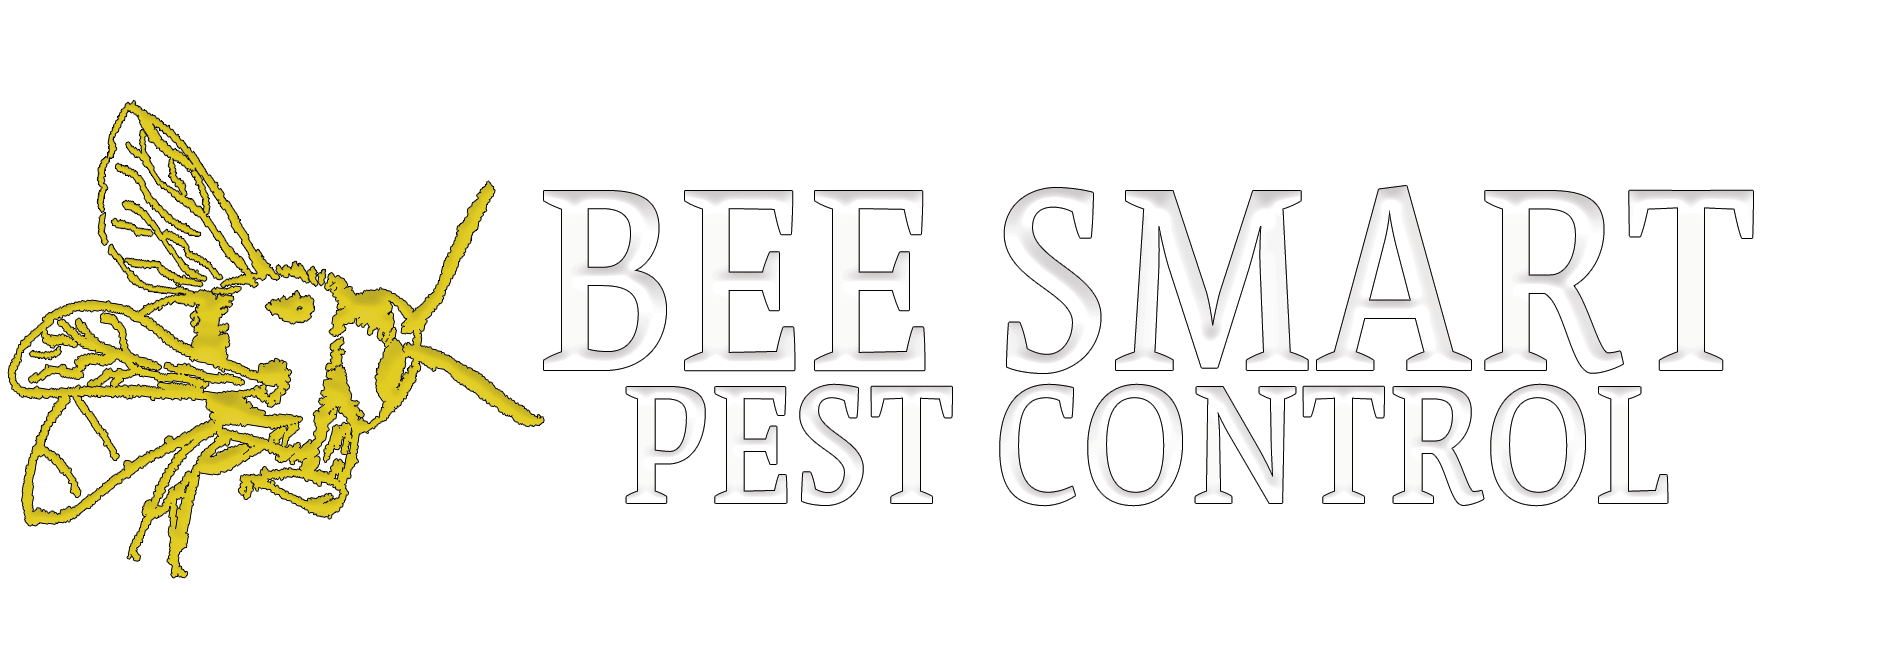 Pest Control services in Connecticut - Mouse Control